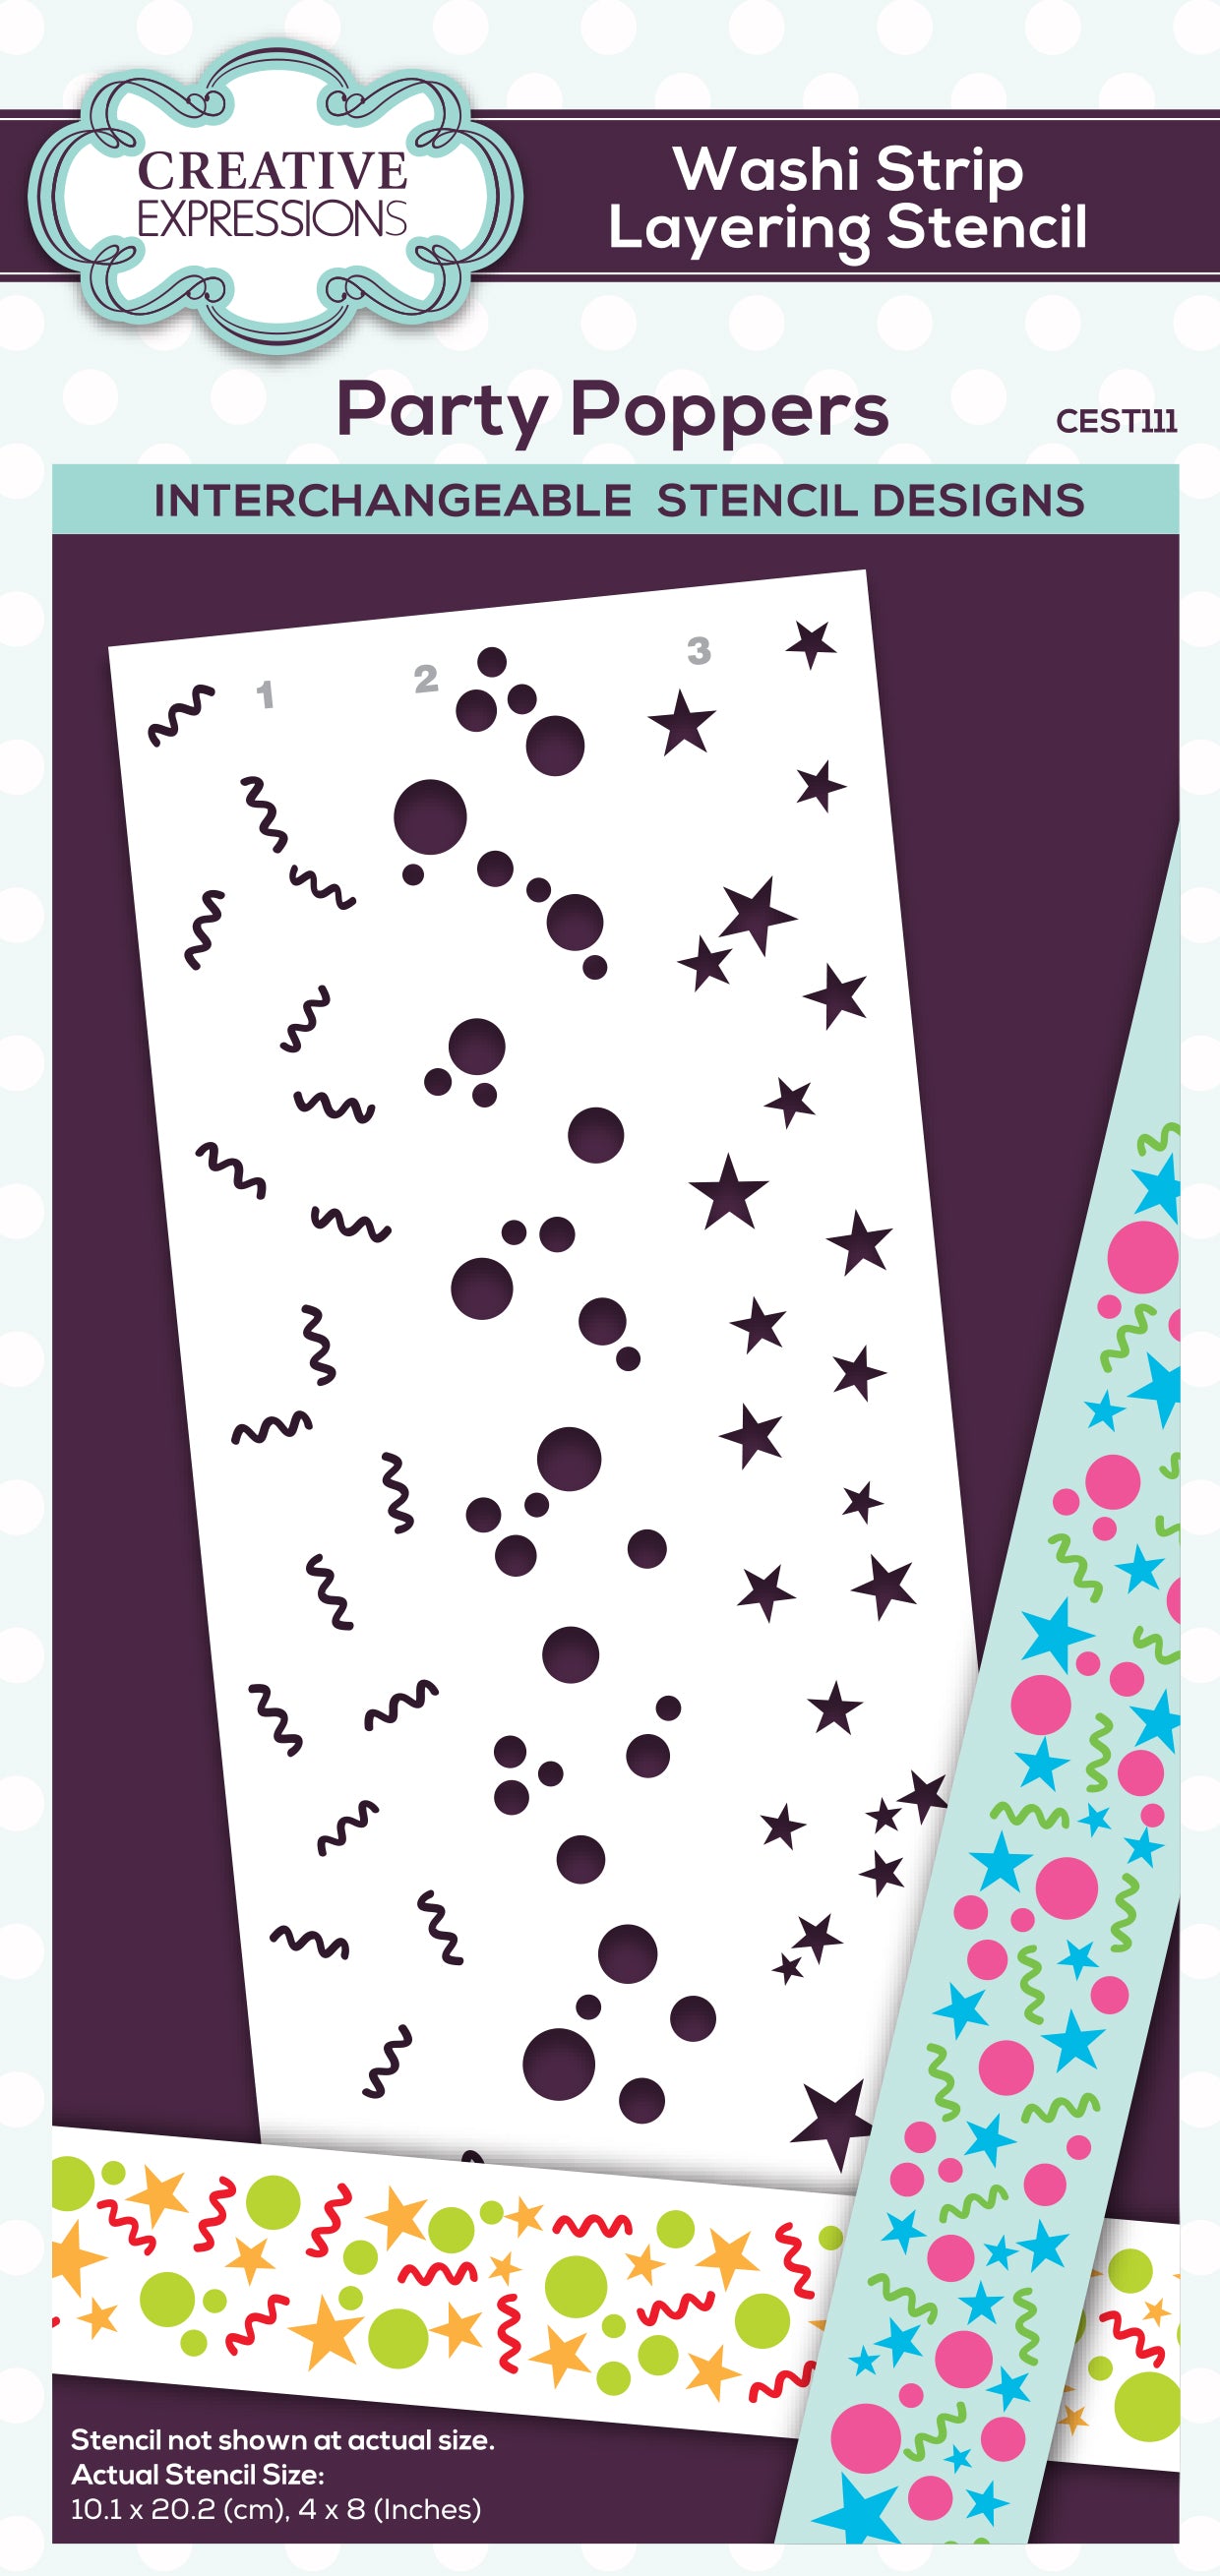 Creative Expressions Party Poppers Washi Strip Layering Stencil